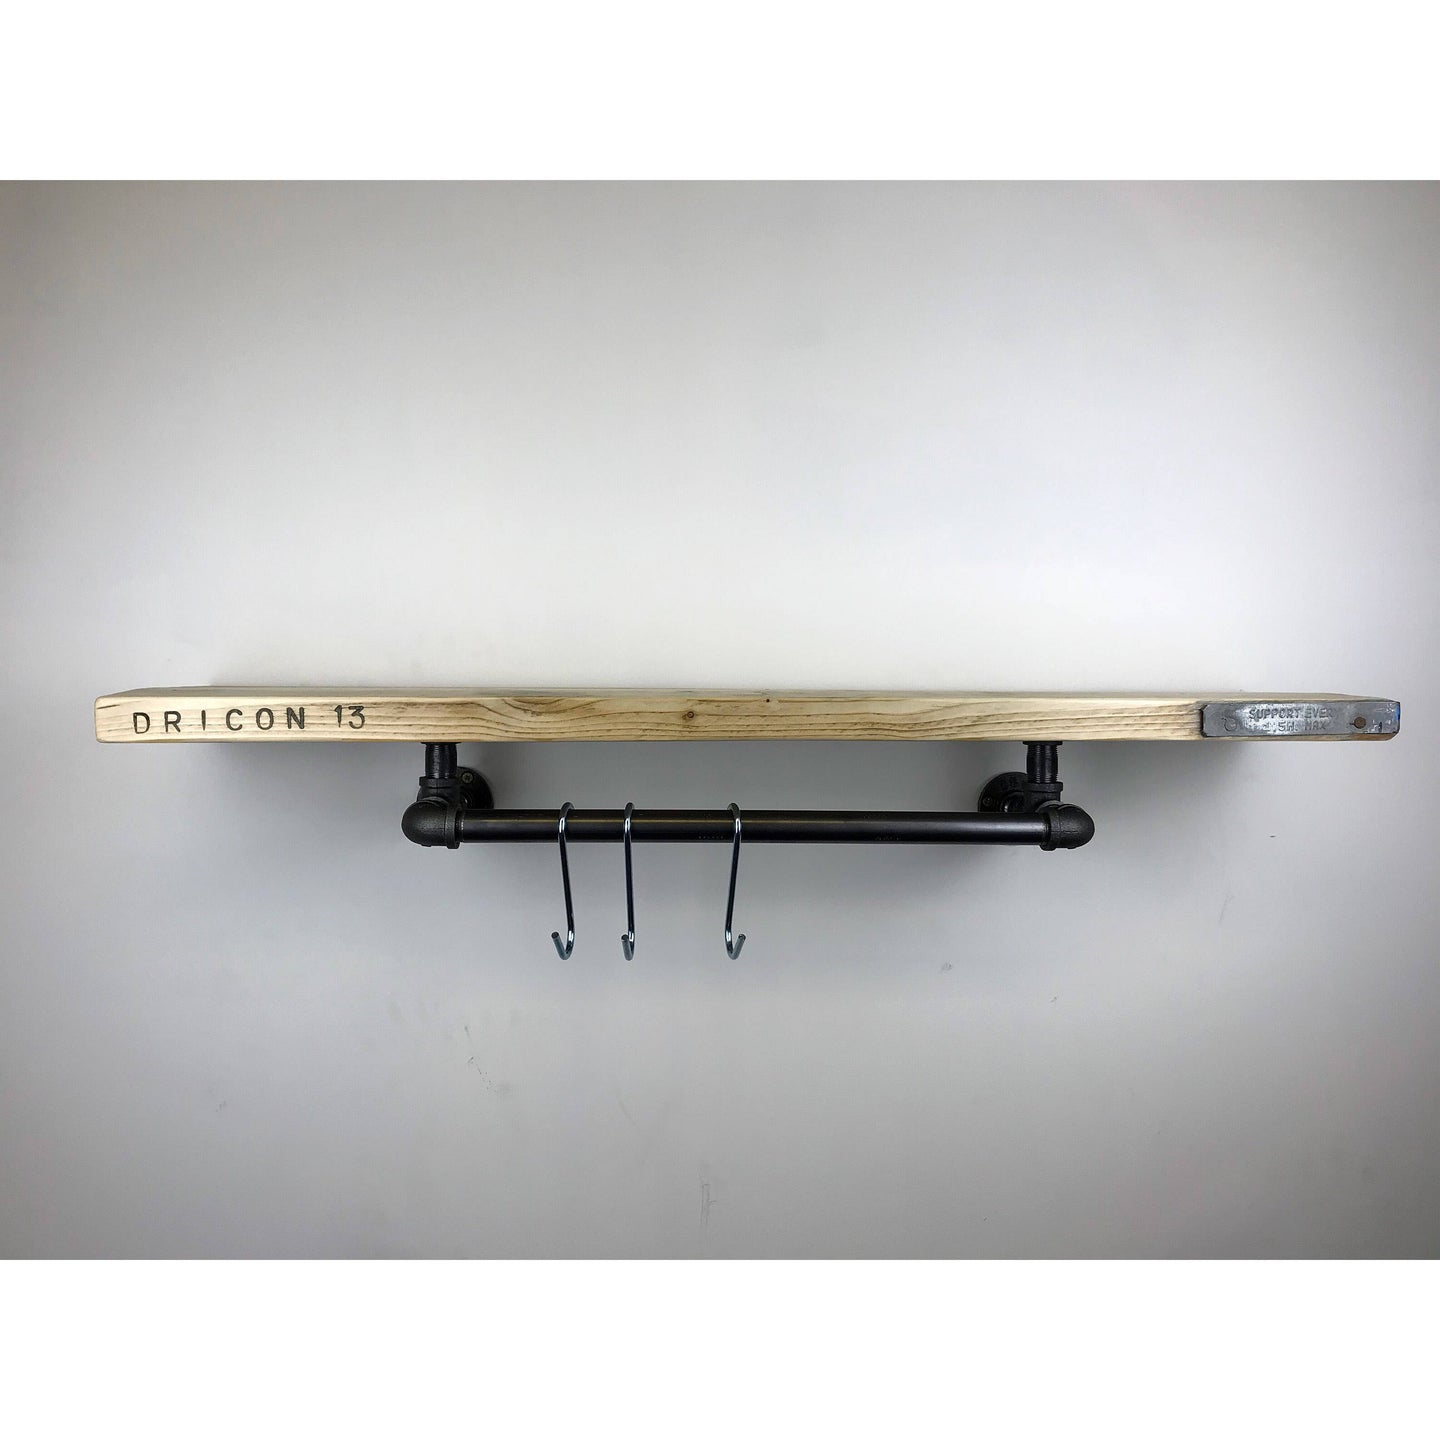 Steel pipe shelf brackets with clothes hanging rail